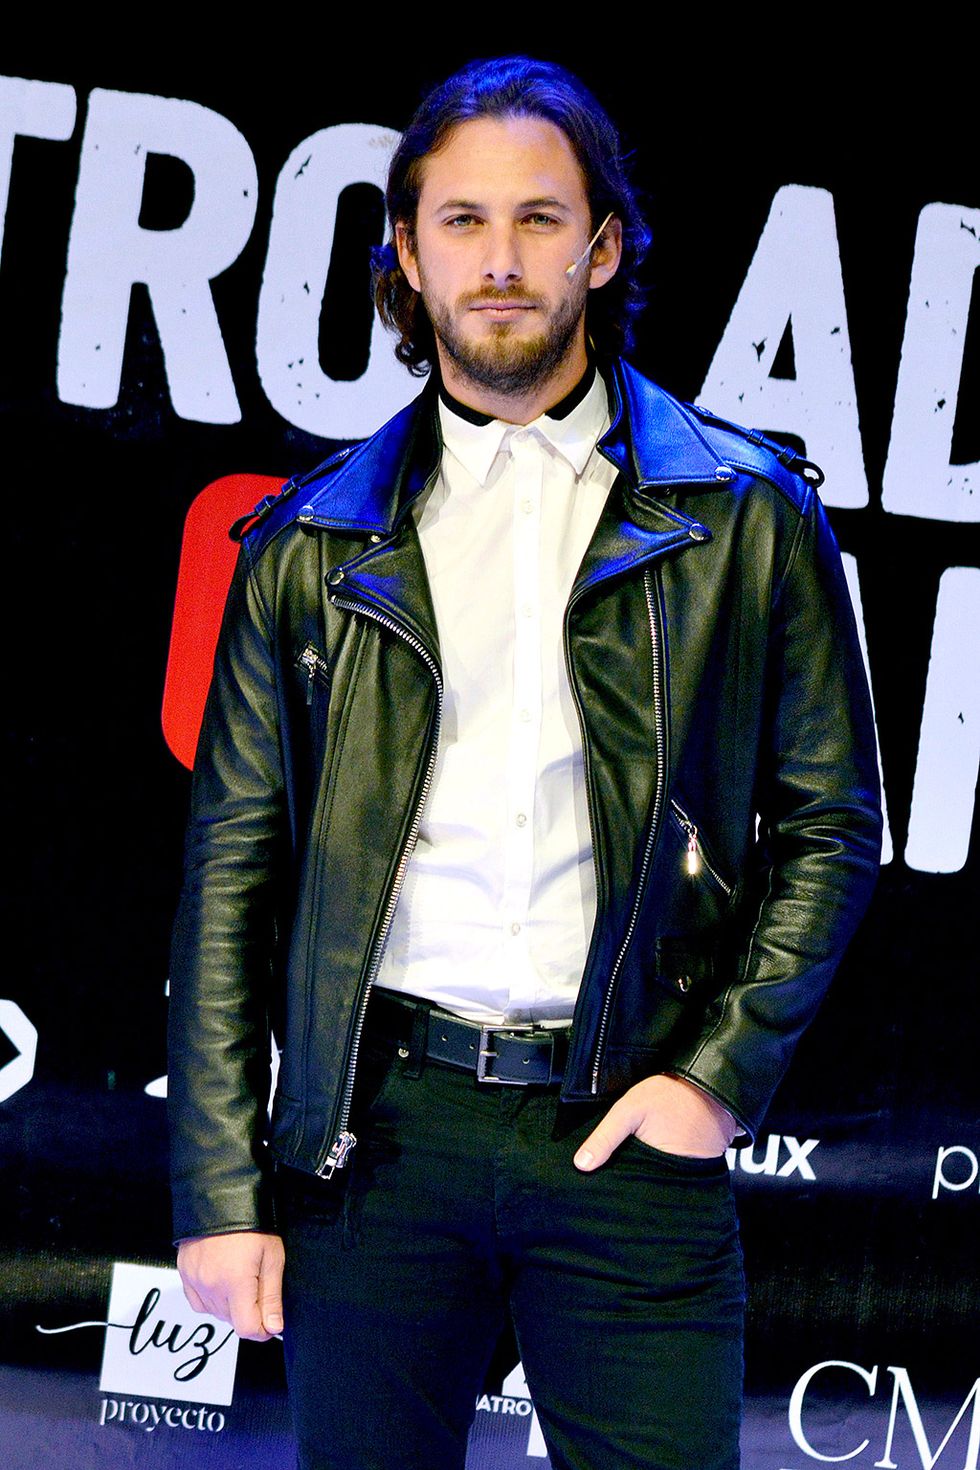 Jacket, Performance, Facial hair, Leather, Textile, Leather jacket, Event, Beard, Music artist, Style, 